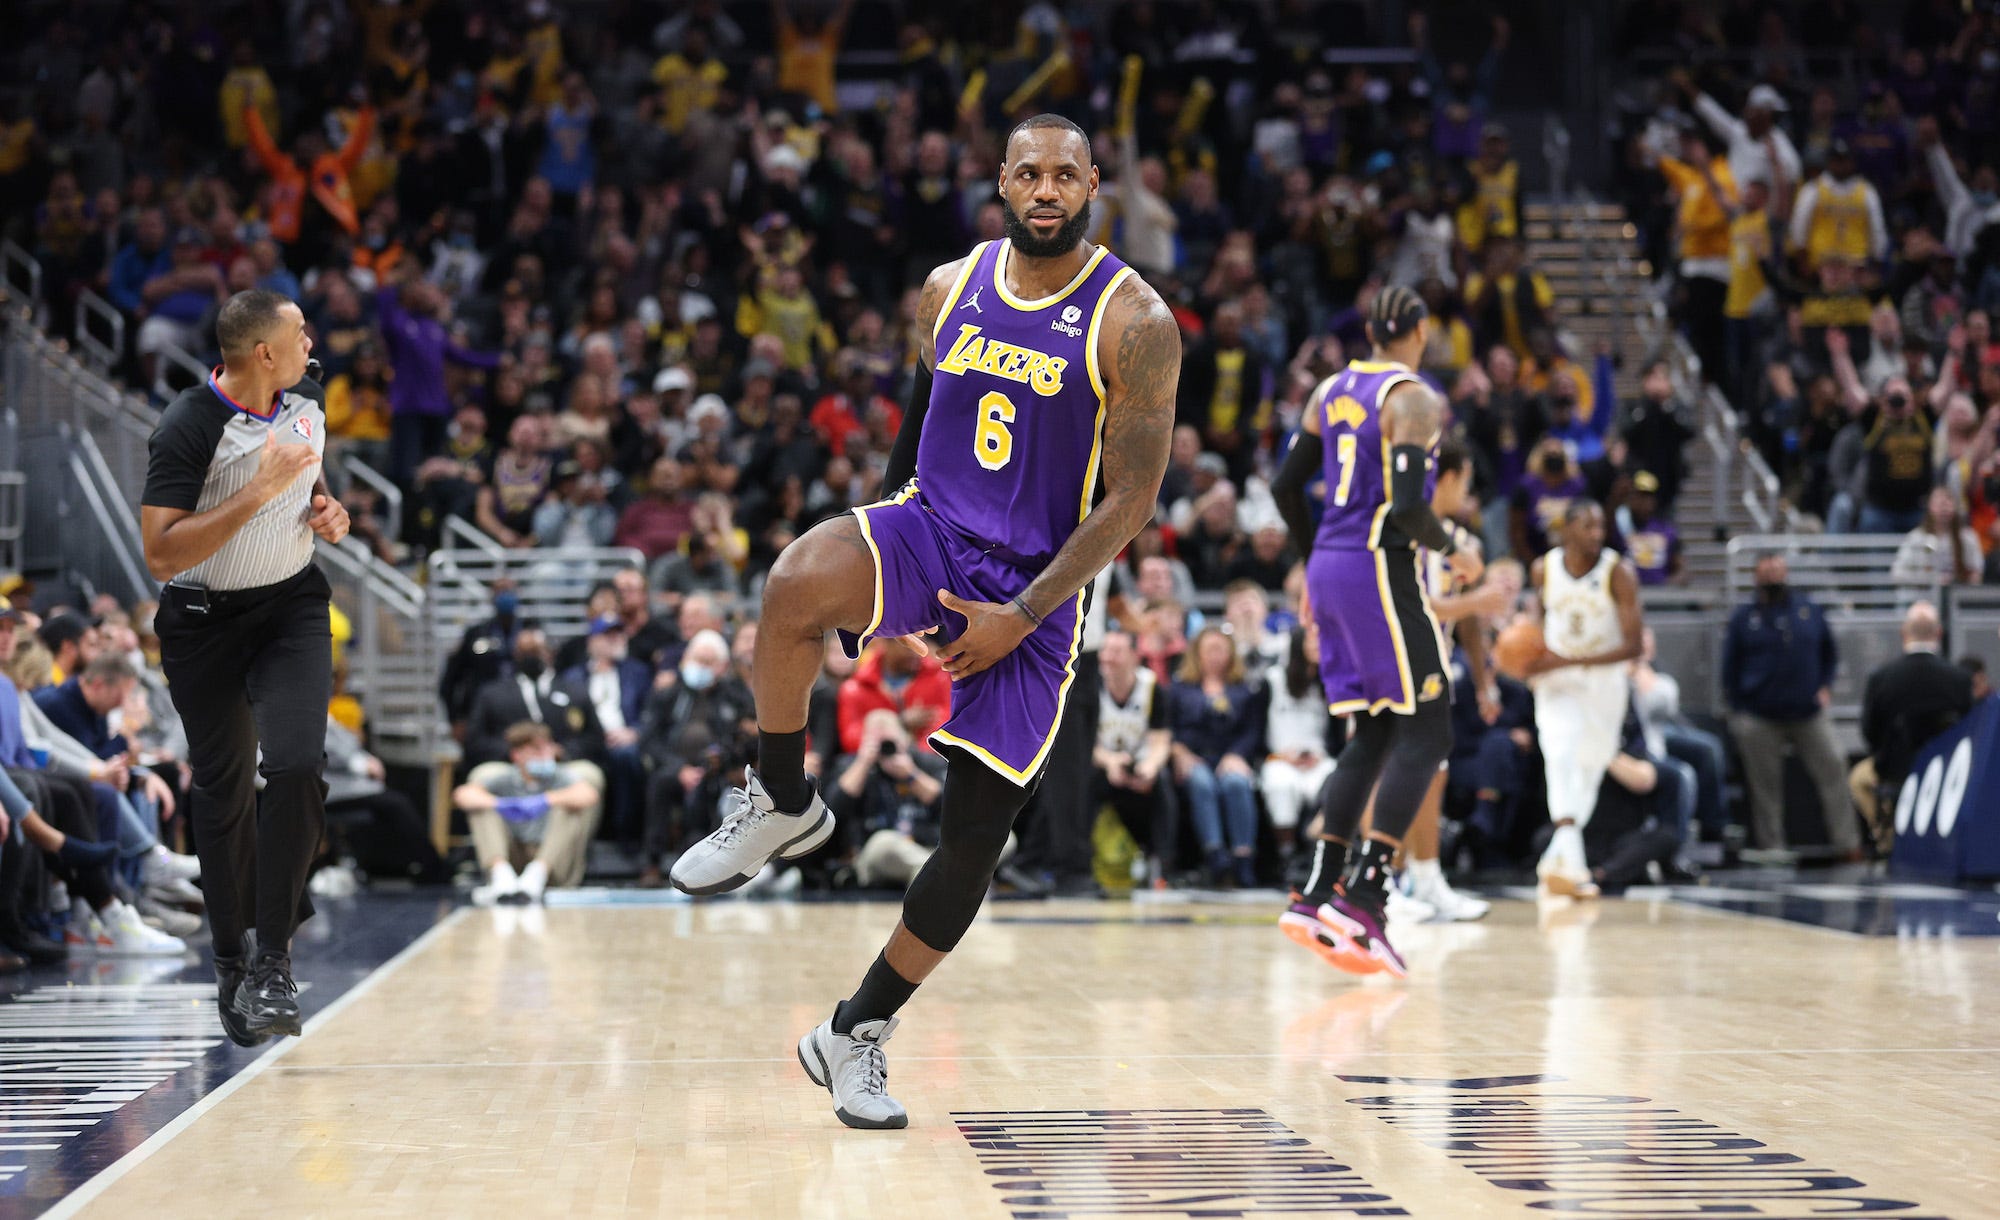 LeBron James #6 of the Los Angeles Lakers celebrates in the 124-116 OT win against the Indiana Pacers at Gainbridge Fieldhouse